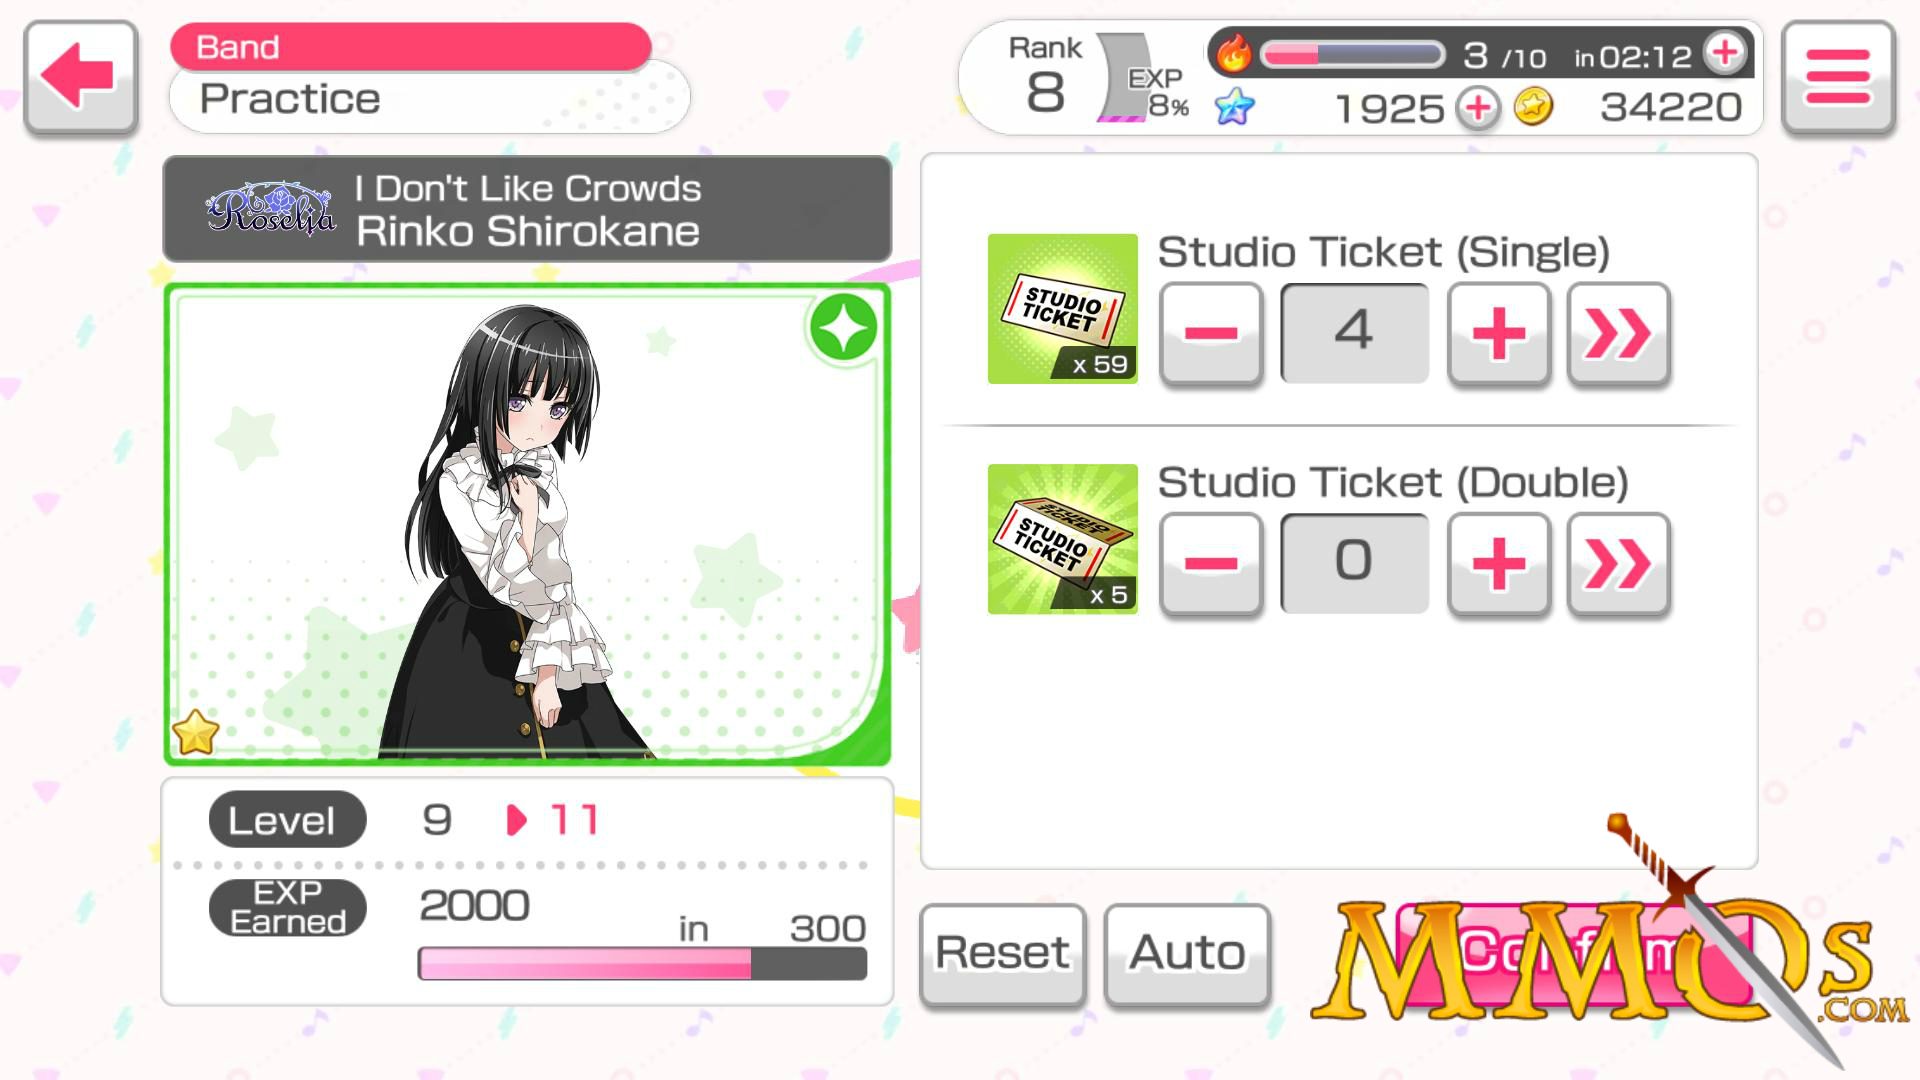 BanG Dream! Girls Band Party! is one of the best rhythm games around